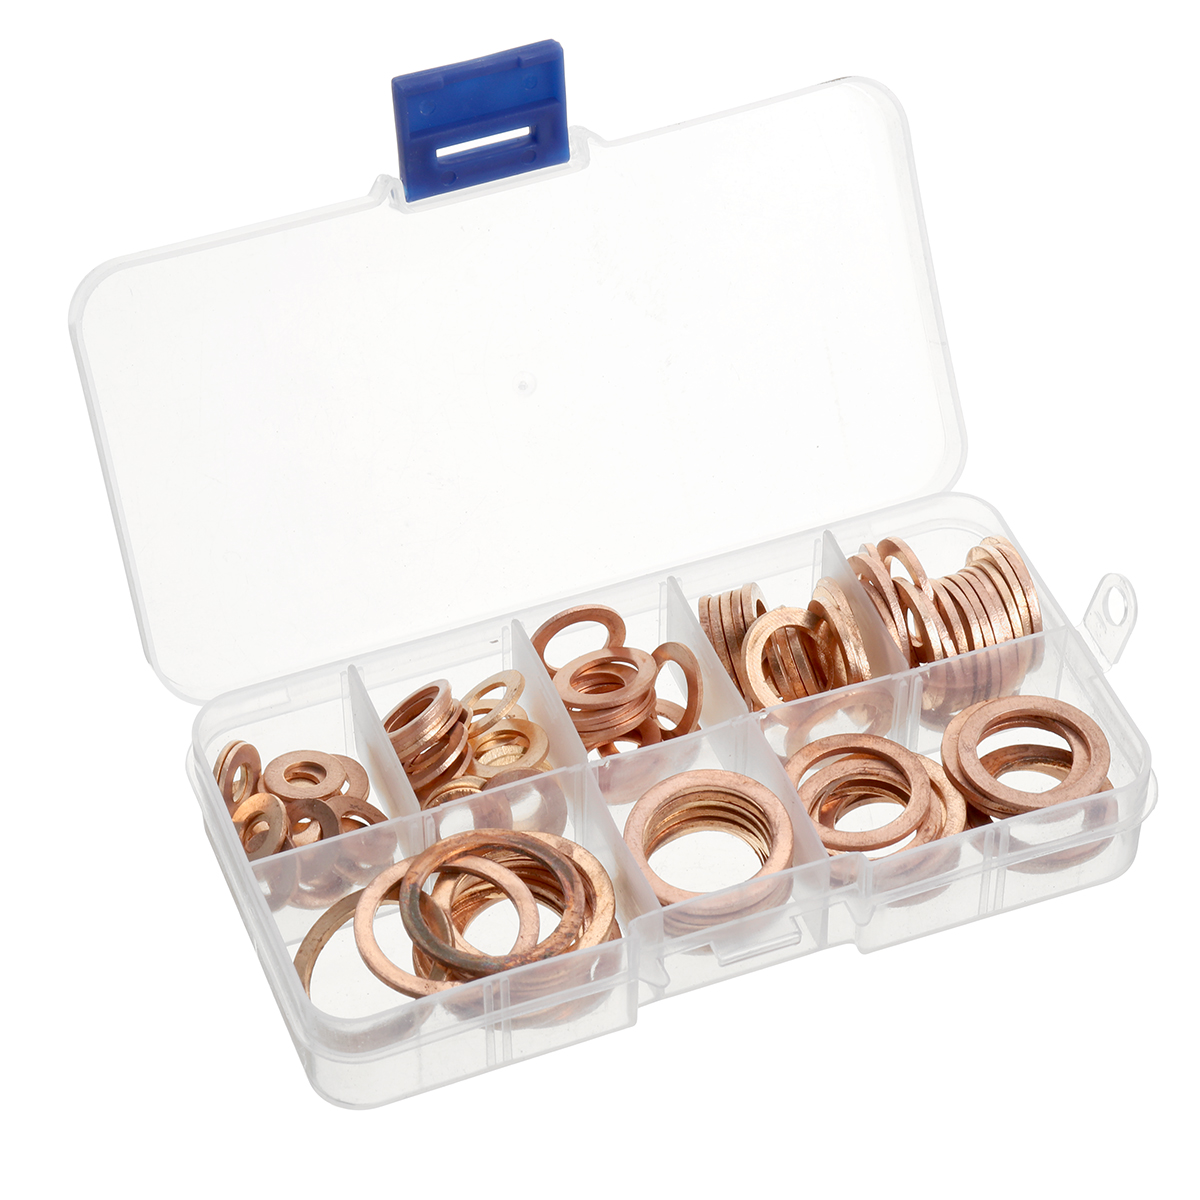 100Pcs-Assorted-Copper-Sealing-Solid-Gasket-Washer-Sump-Plug-Oil-For-Boat-Crush-Flat-Seal-Ring-Tool--1809755-4